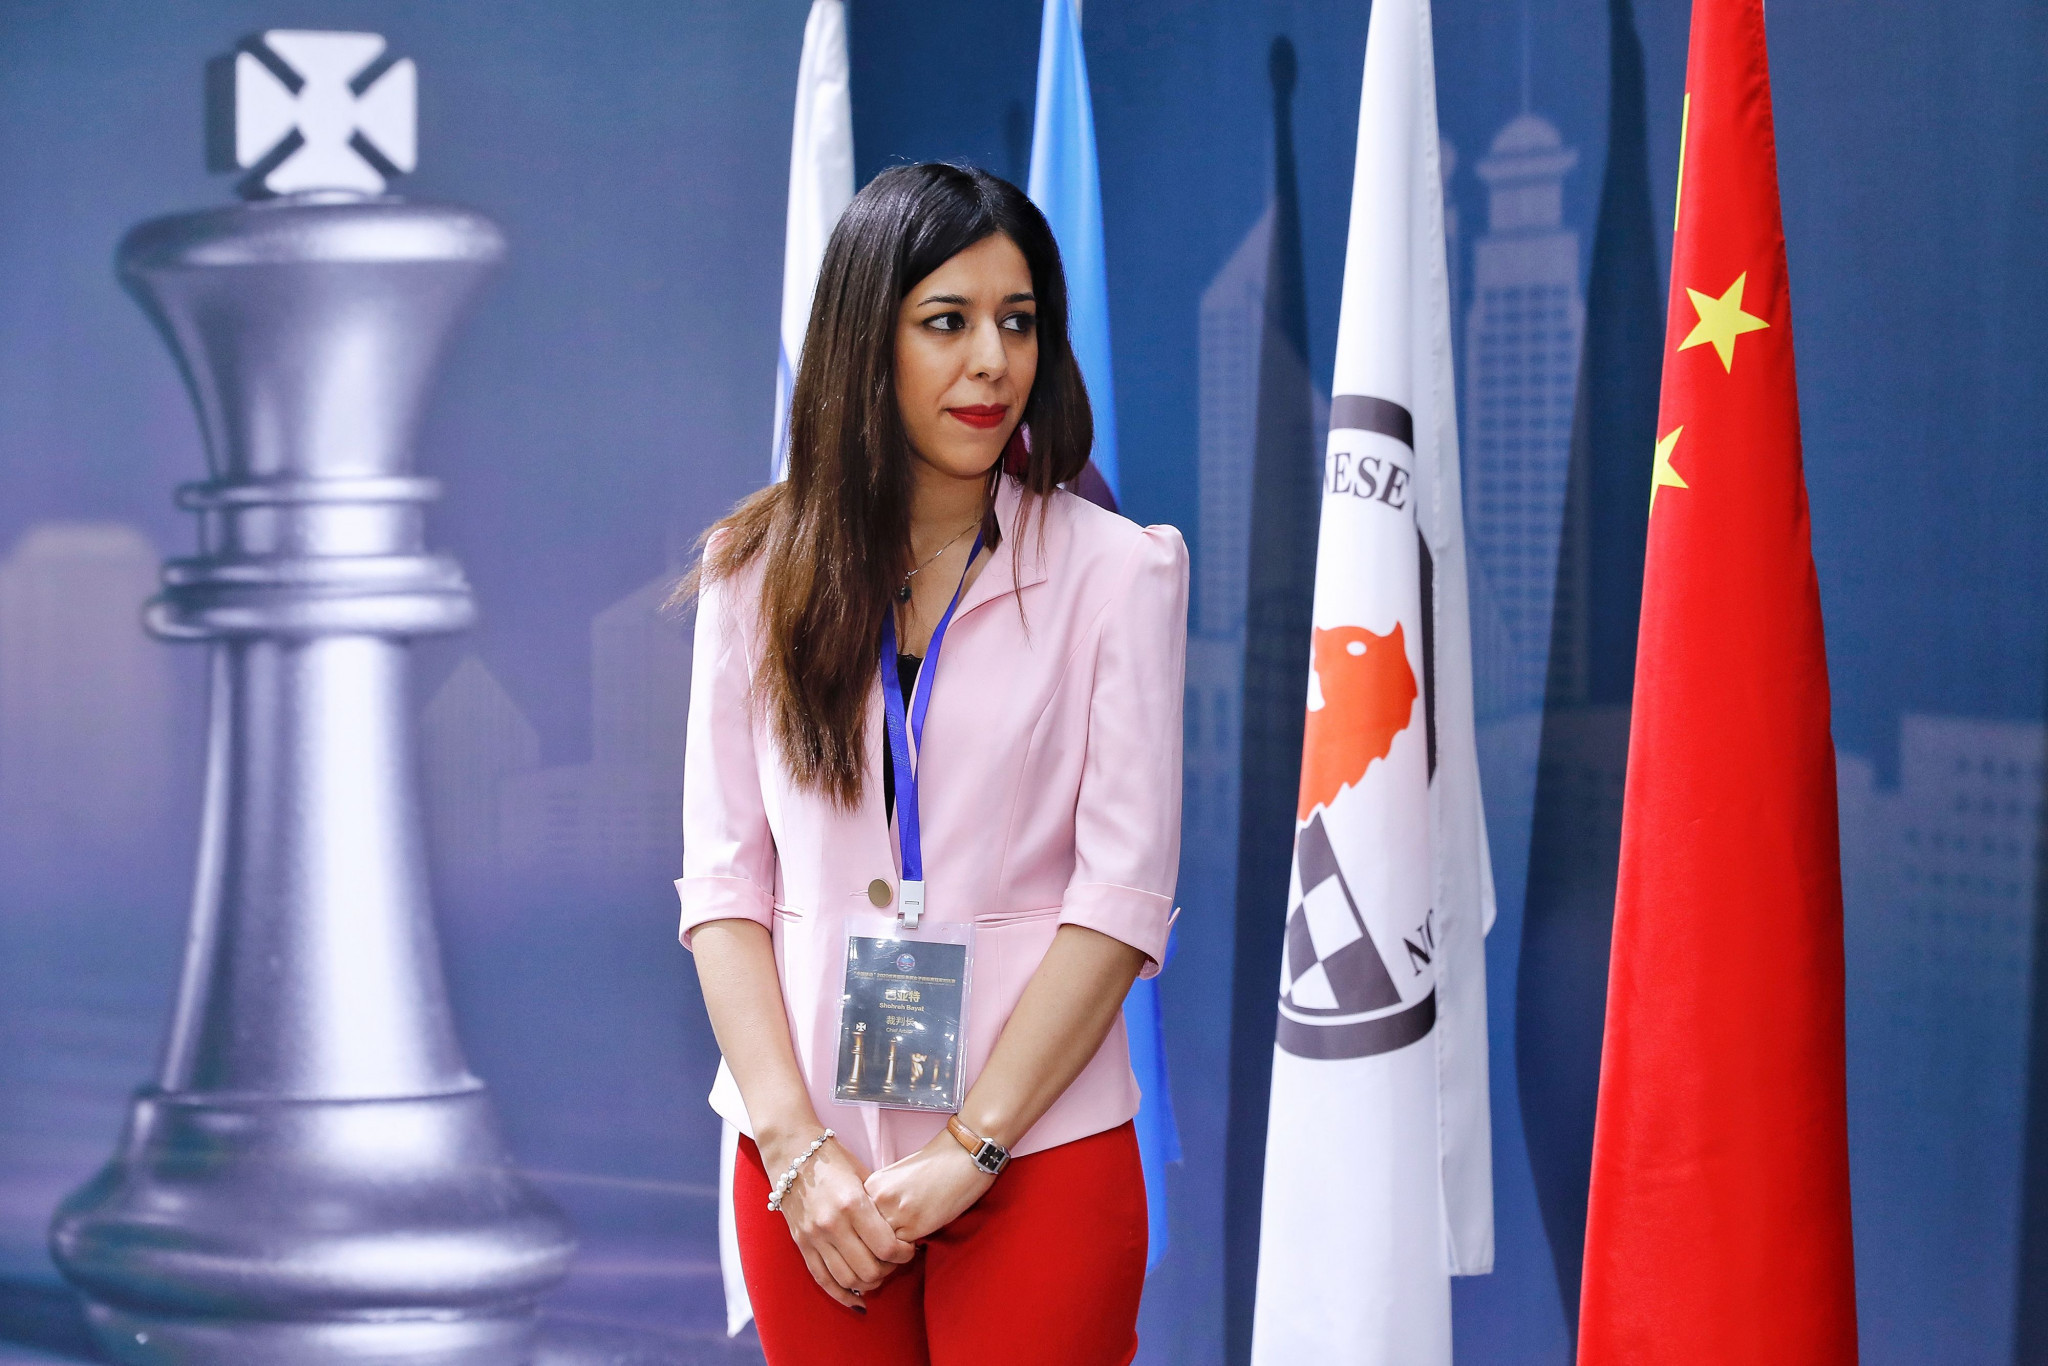 The 2020 Women's World Chess Championship chief arbiter Shohreh Bayat also received death threats after photographs of her not wearing a hijab circulated ©Getty Images 